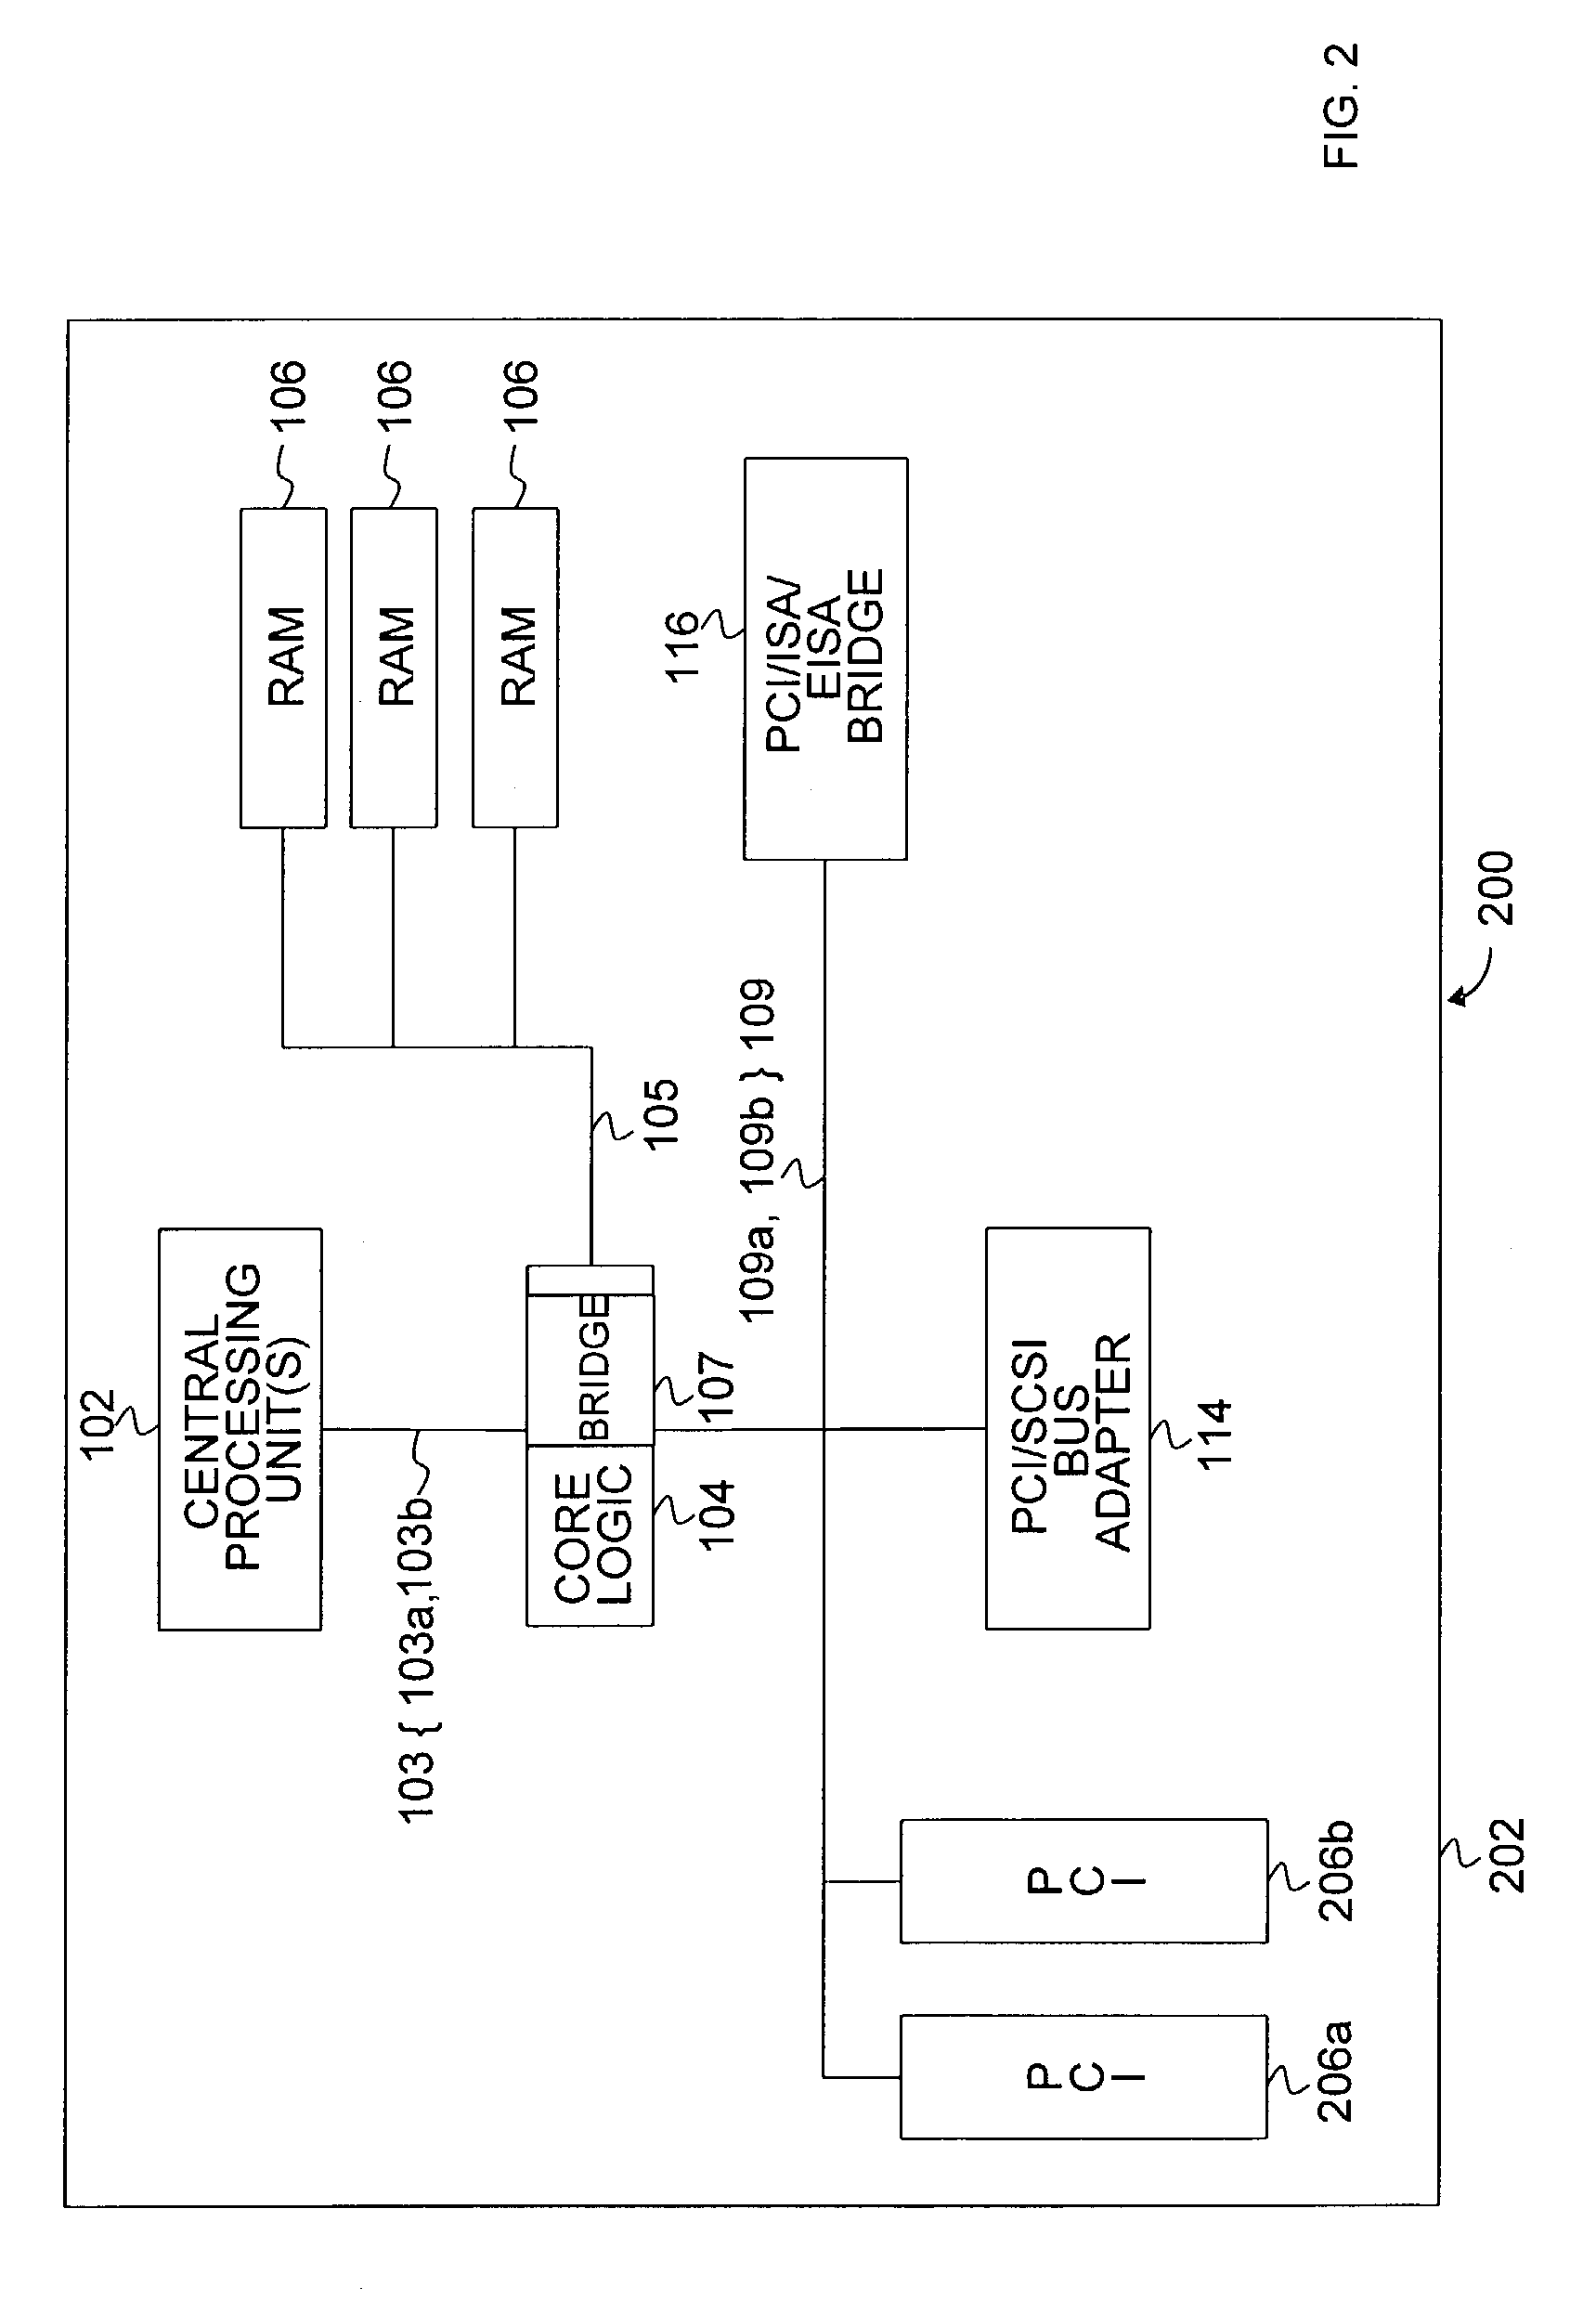 Supporting a host-to-input/output (I/O) bridge